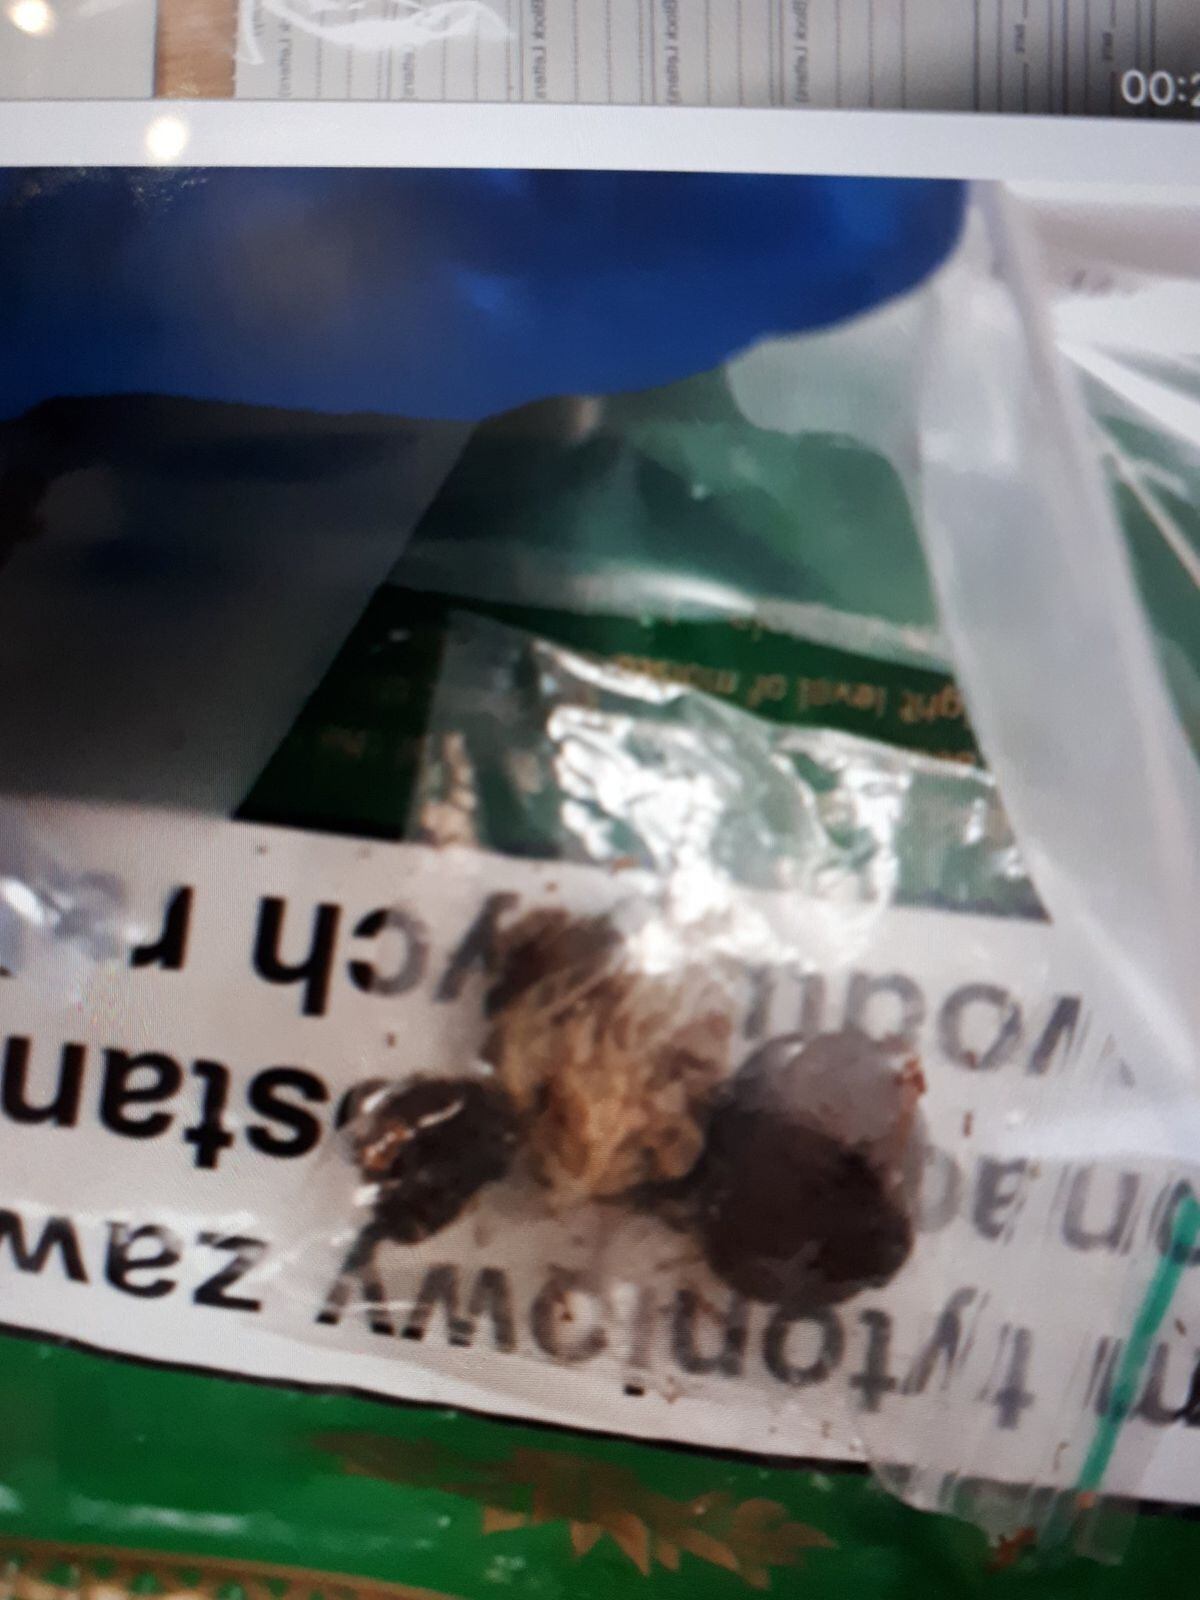 Items seized from the car. Picture: @LpptNWestMercia